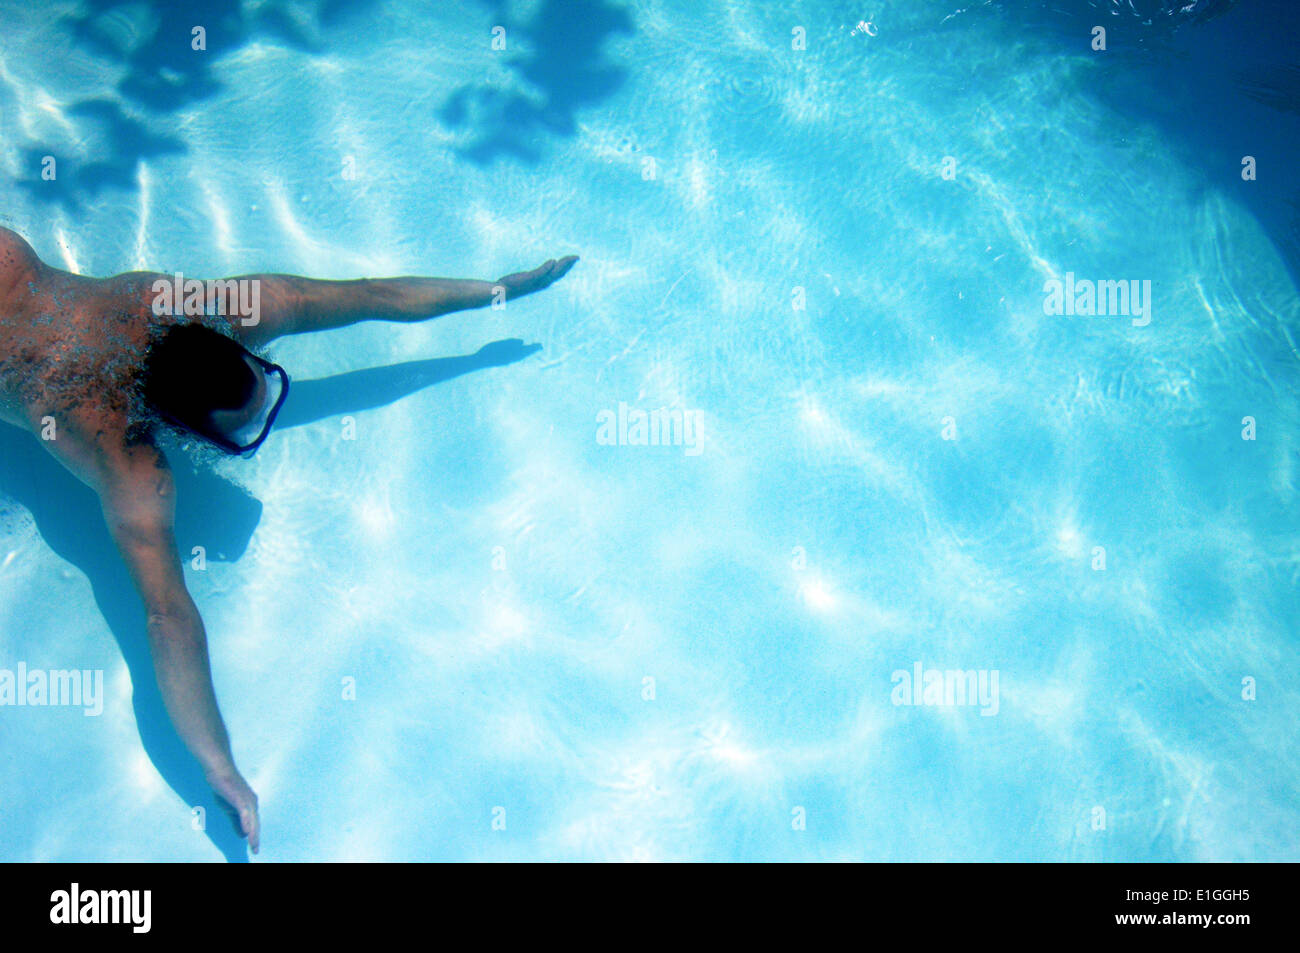 man swimming underwater in a clear blue pool Stock Photo